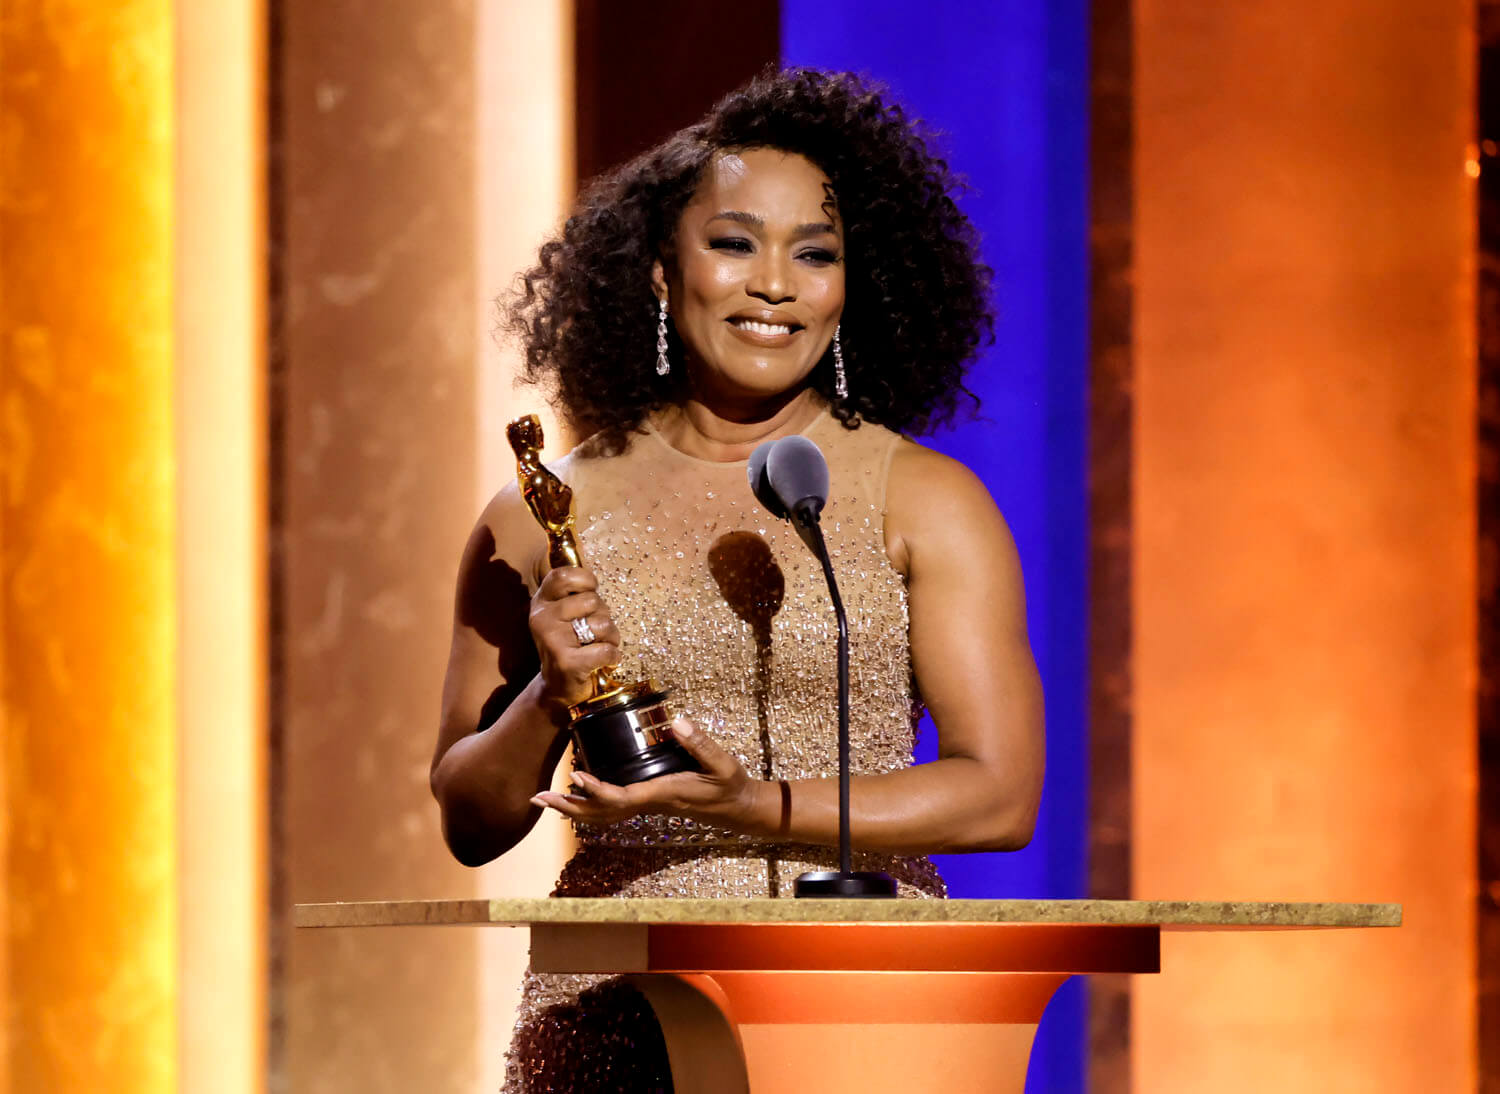 Angela Bassett gave a magnificent speech at the Governors Awards where